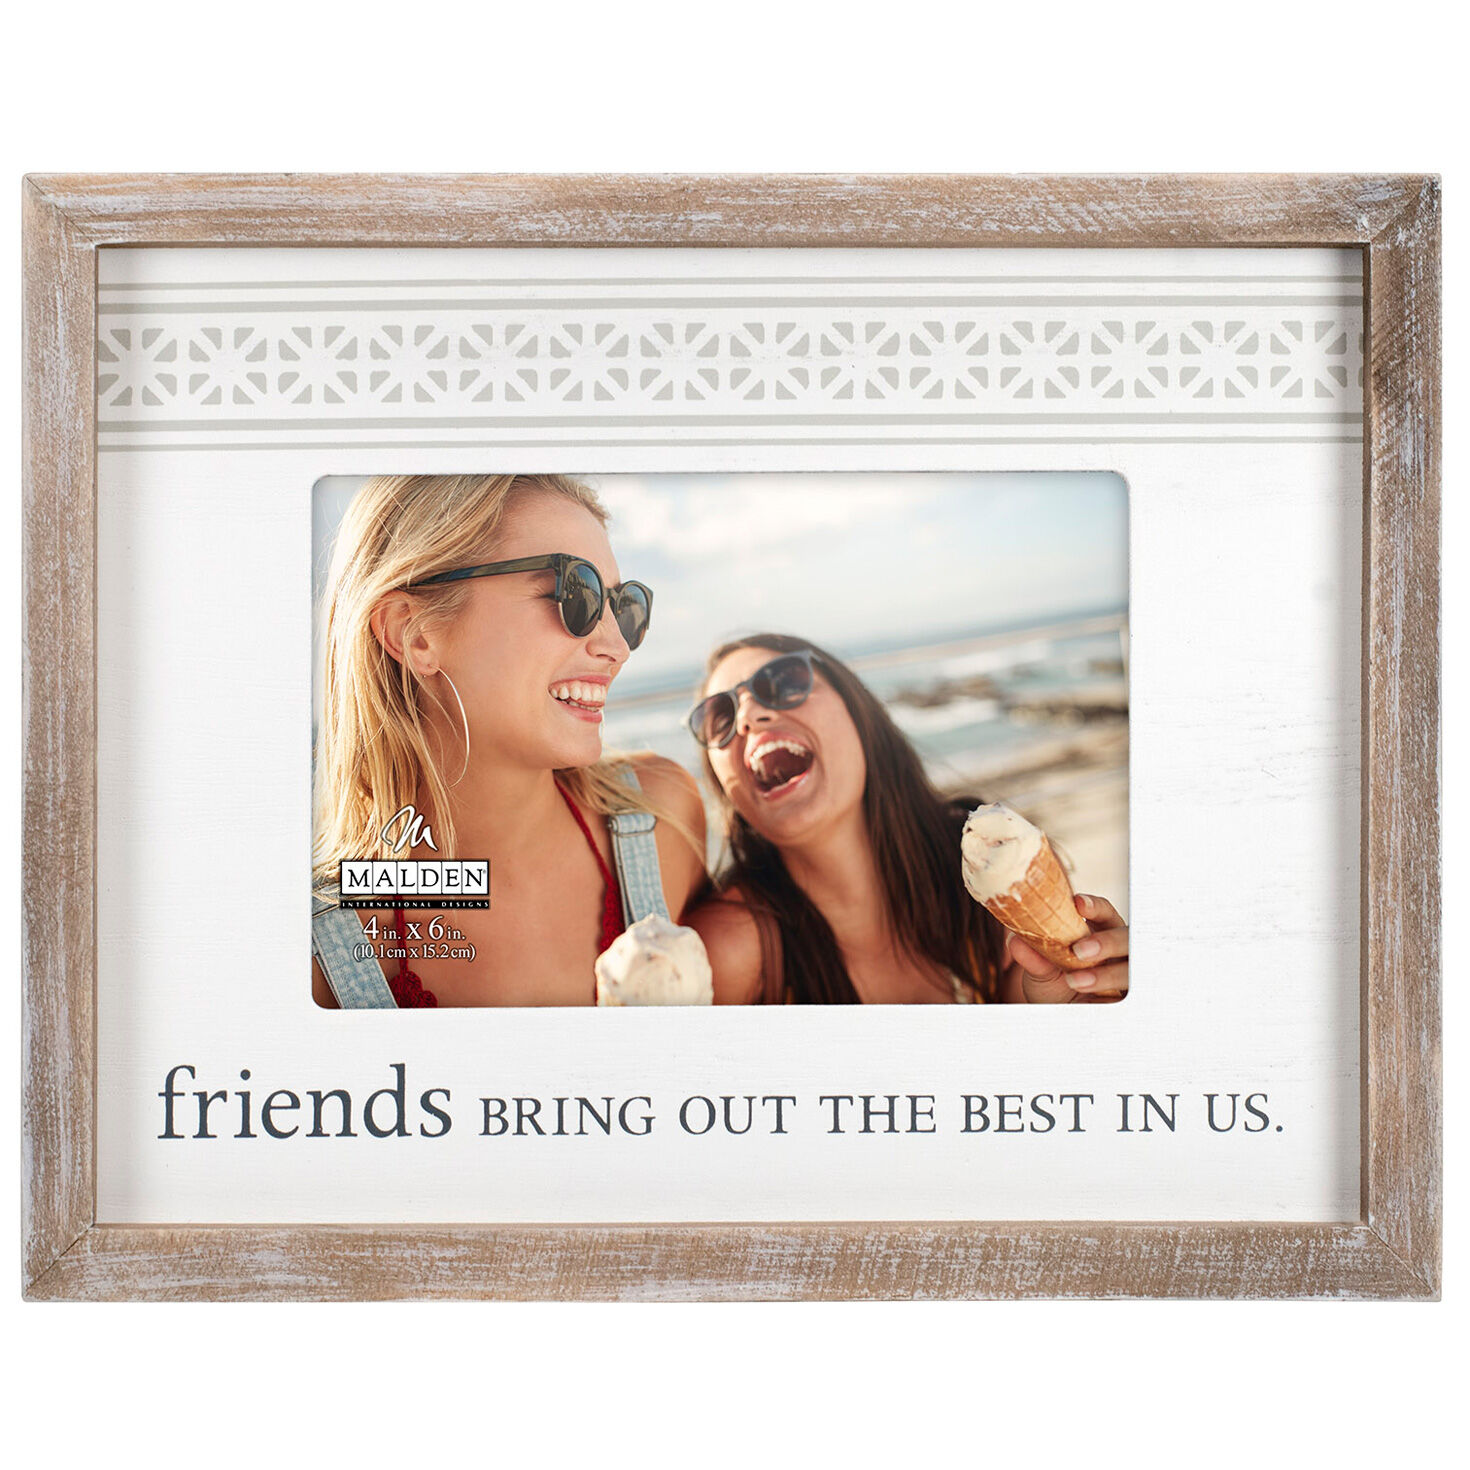 Friends Sentiment Friends are angels photo frame gift FG516AN 